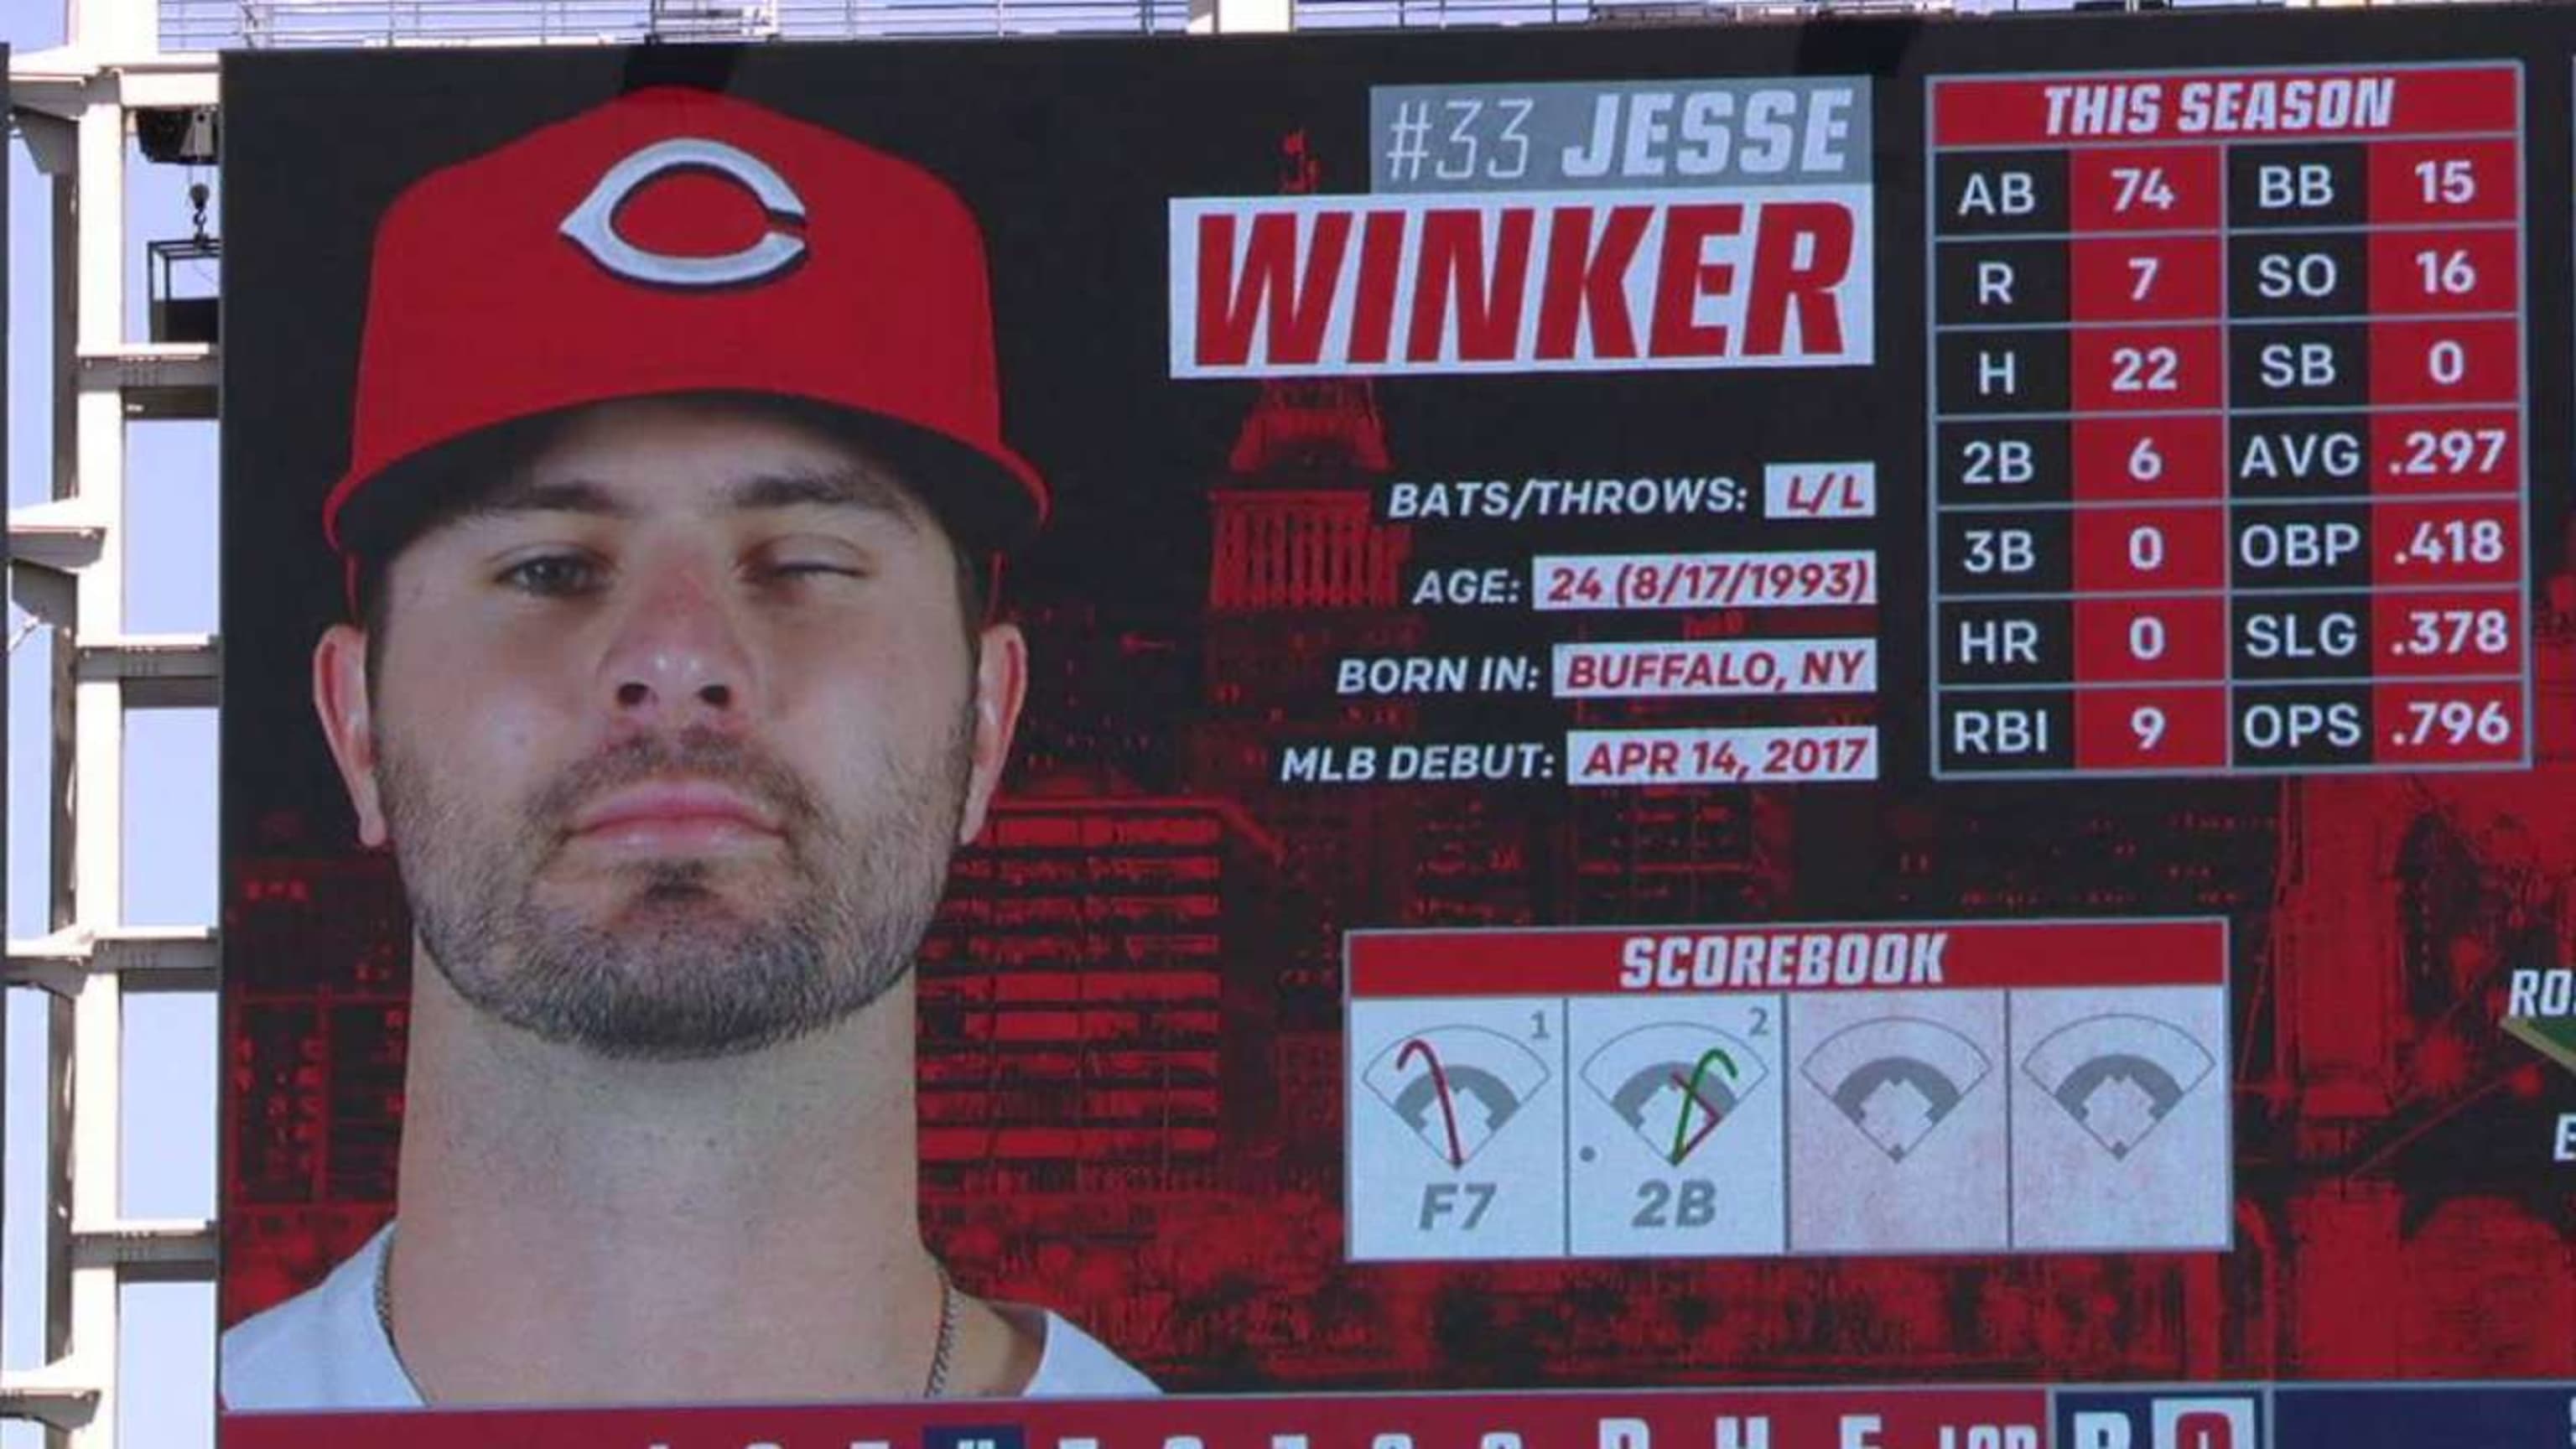 The Target Field video board made the Reds Jesse Winker live up to his name MLB